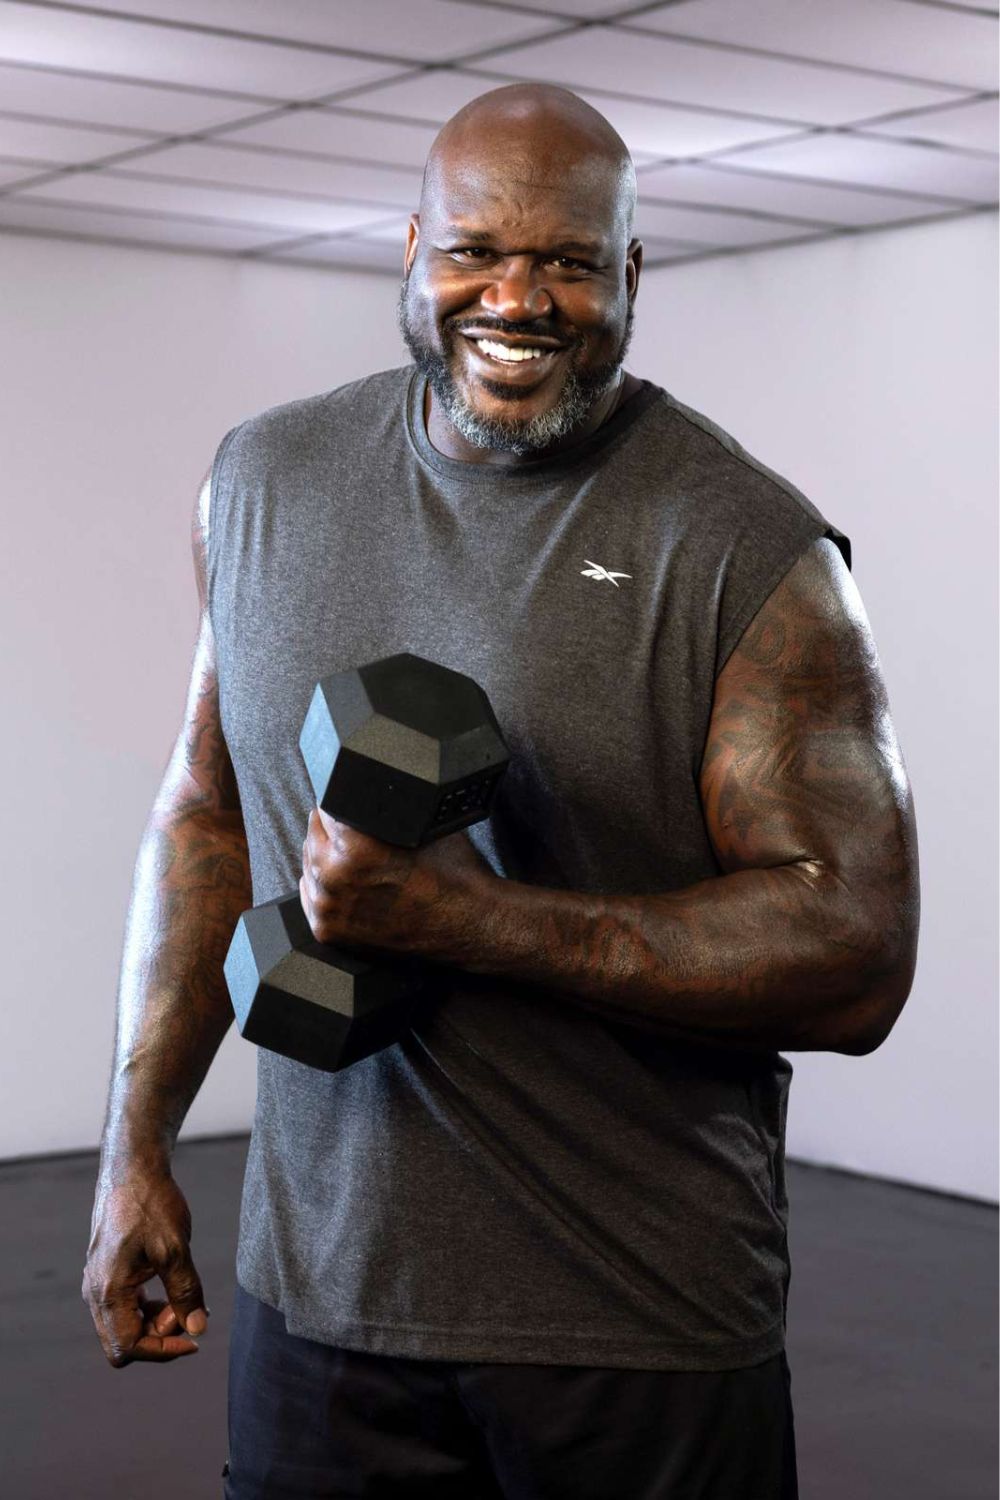 Shaquille O'Neal Former NBA Player & Sports Analyst 